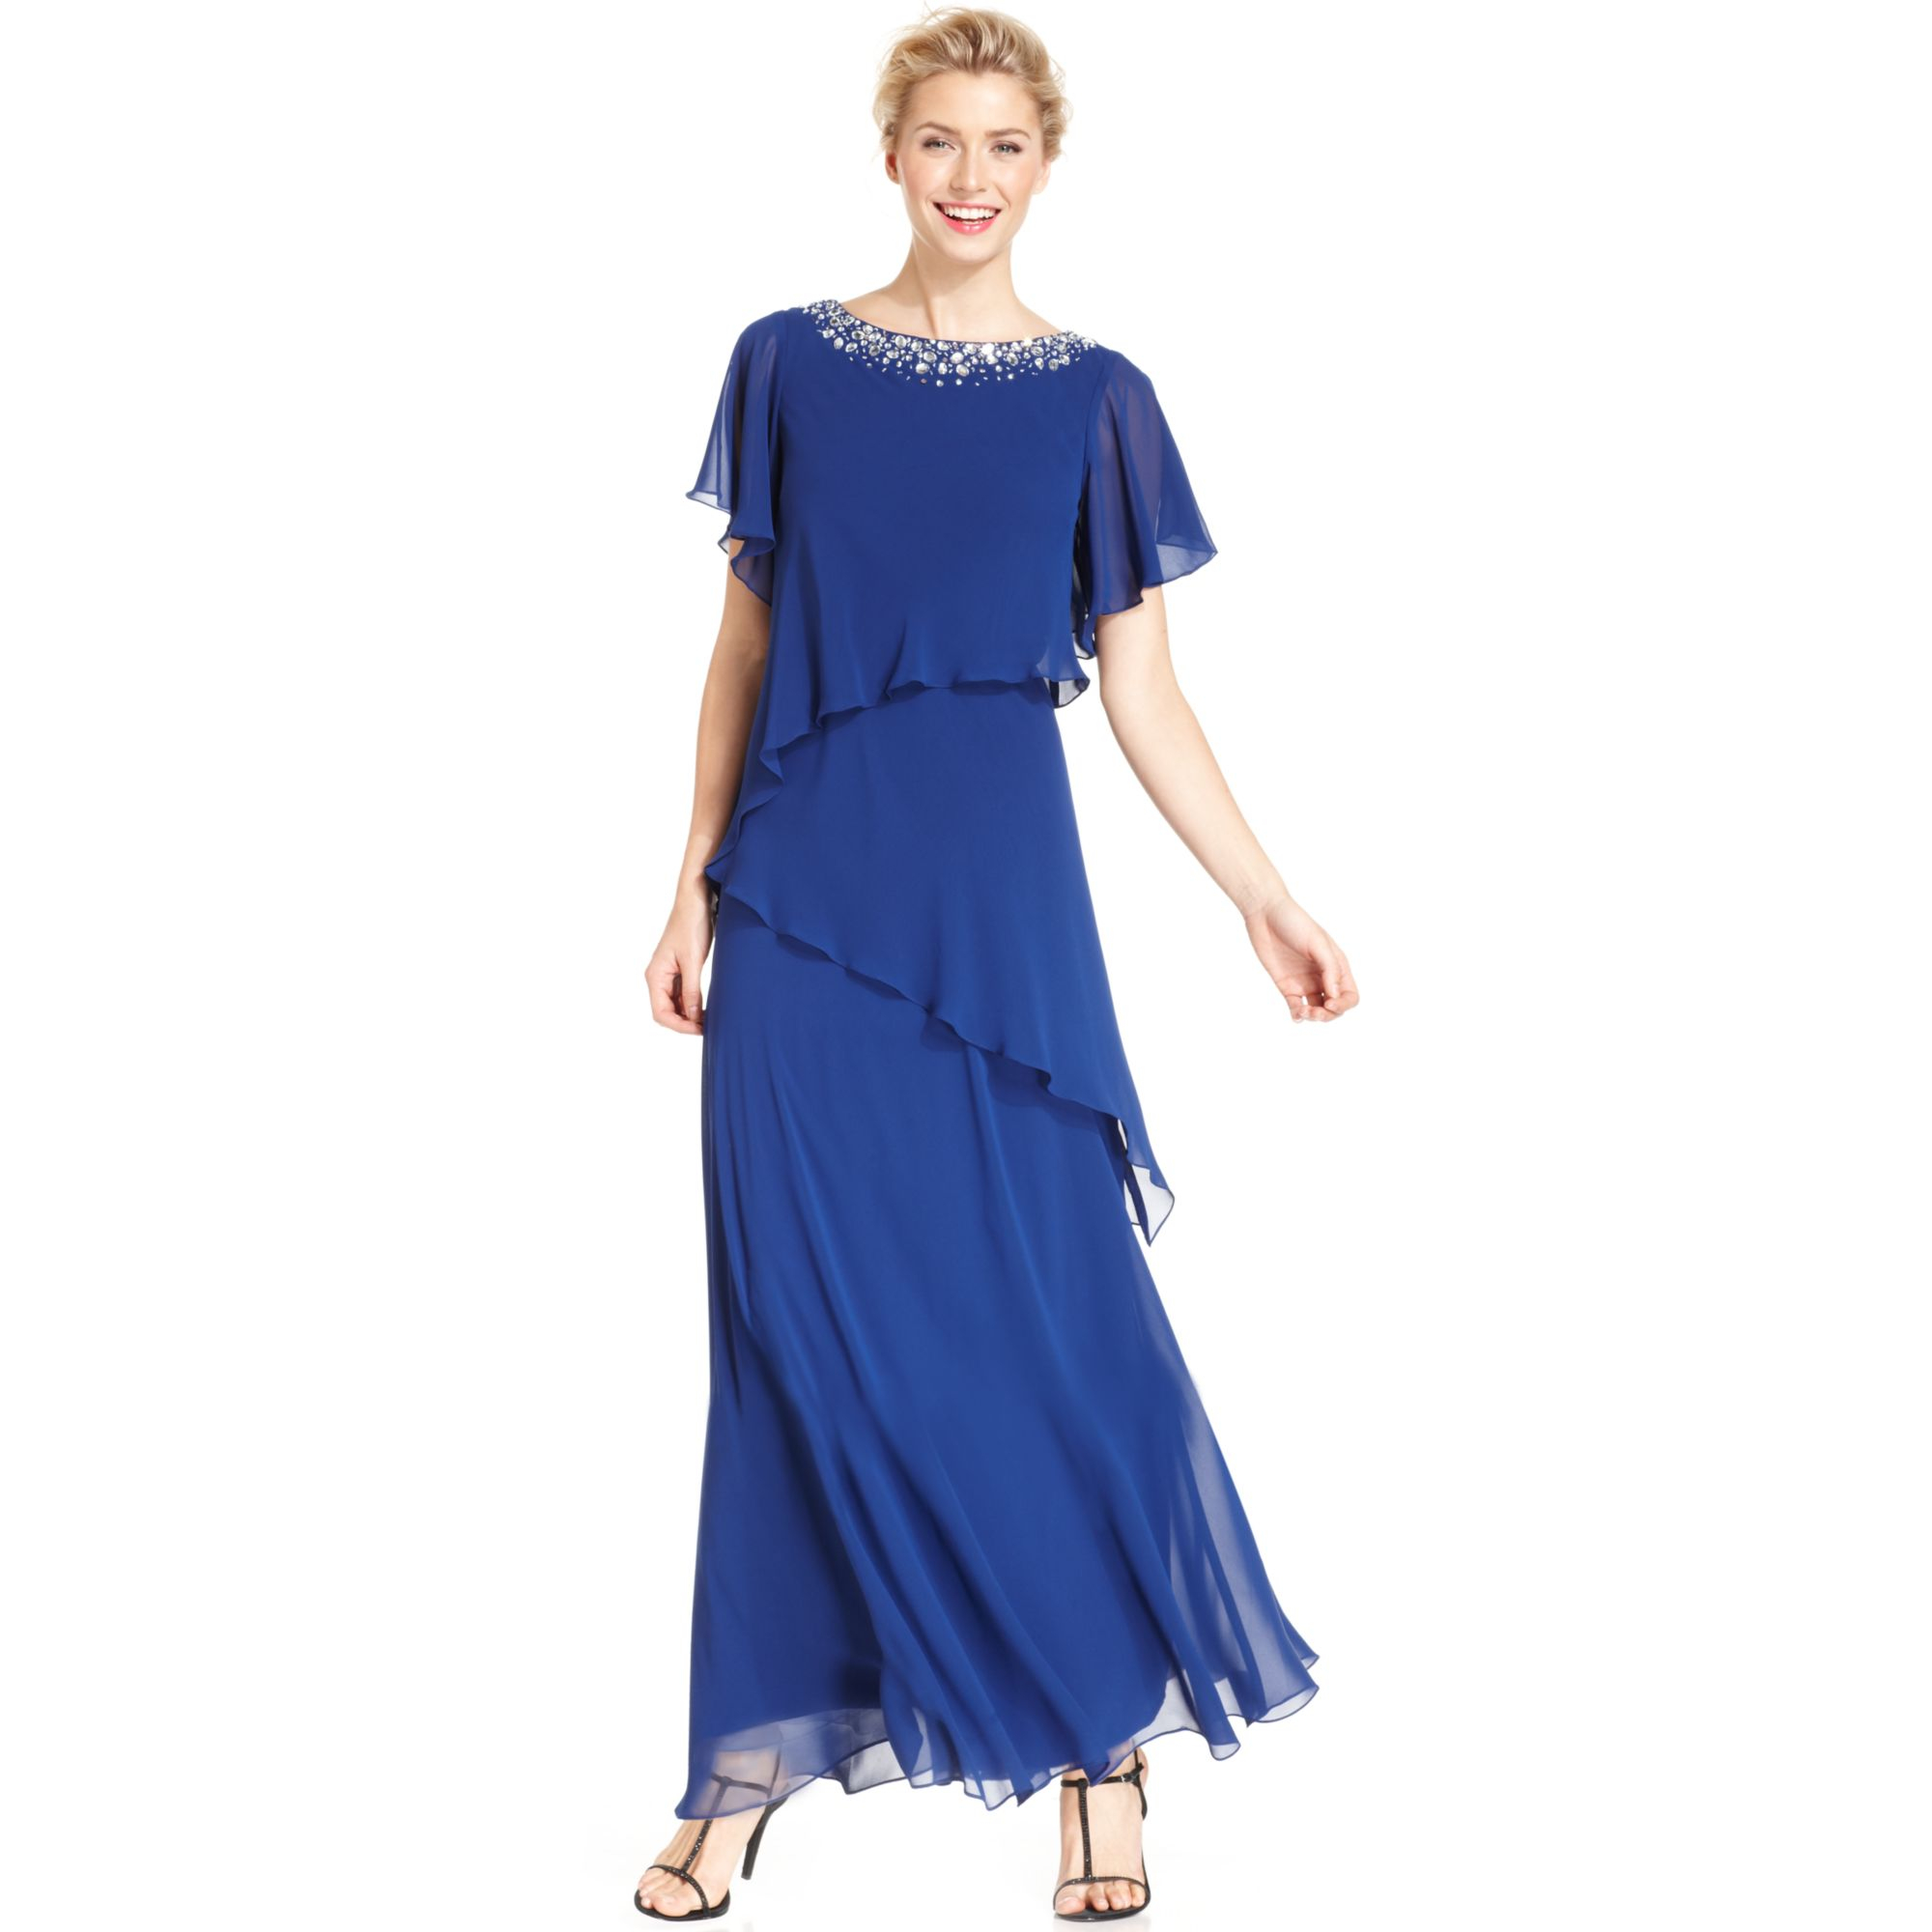 Lyst - Alex Evenings Fluttersleeve Embellished Tiered Gown in Blue